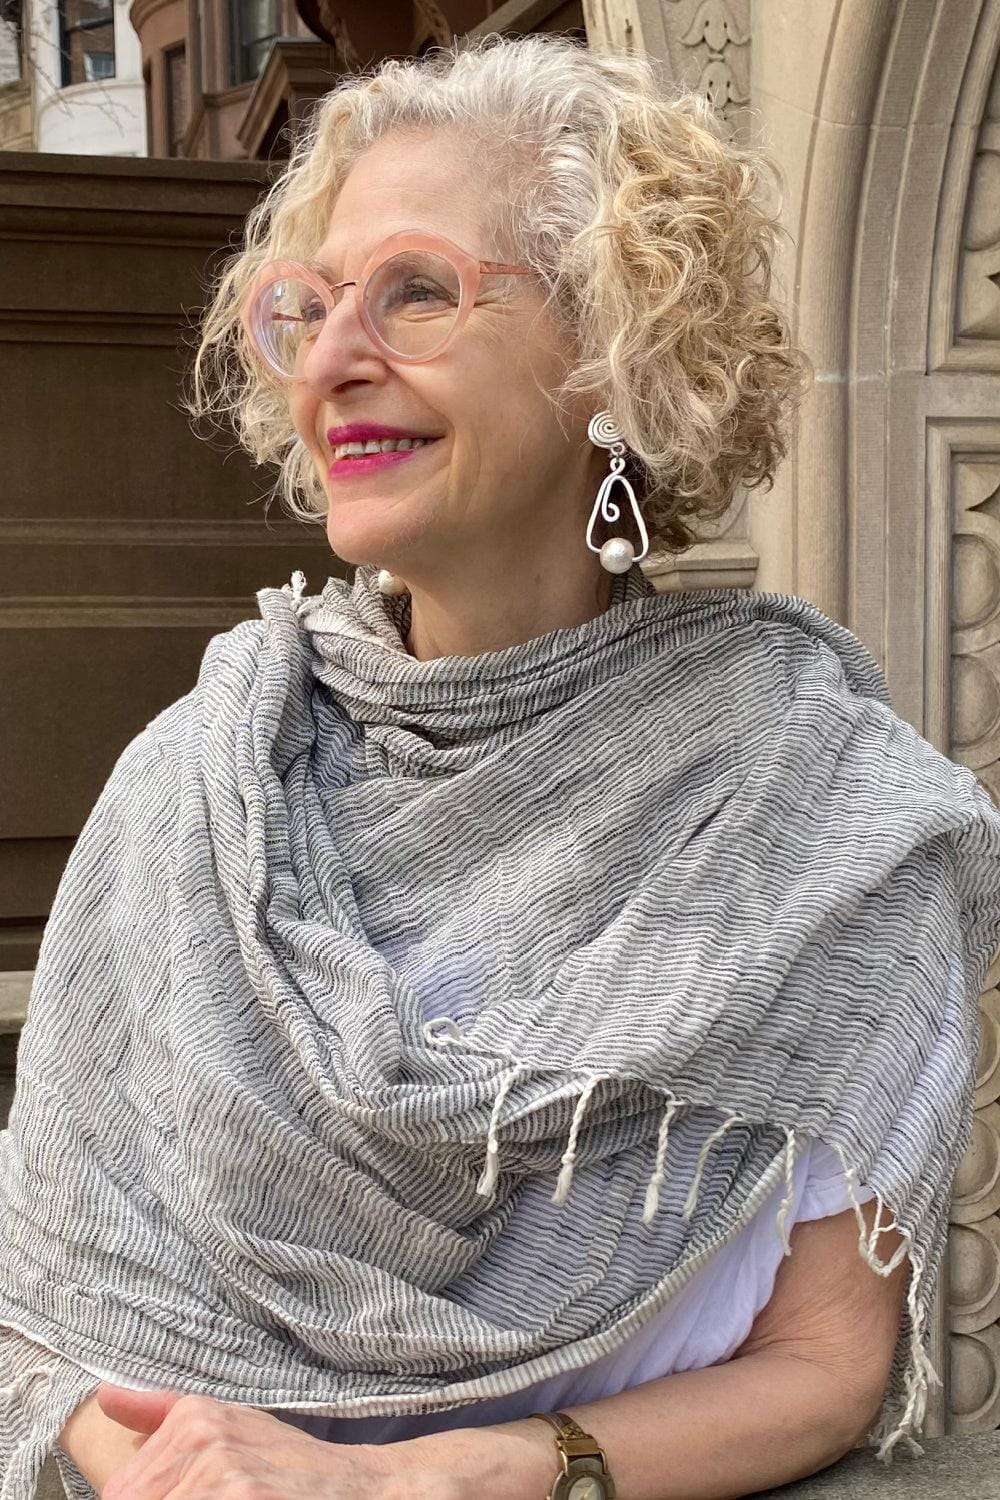 Pretty pale grey soft looking cotton scarf bing worn around the neck of an older woman with blond hair.